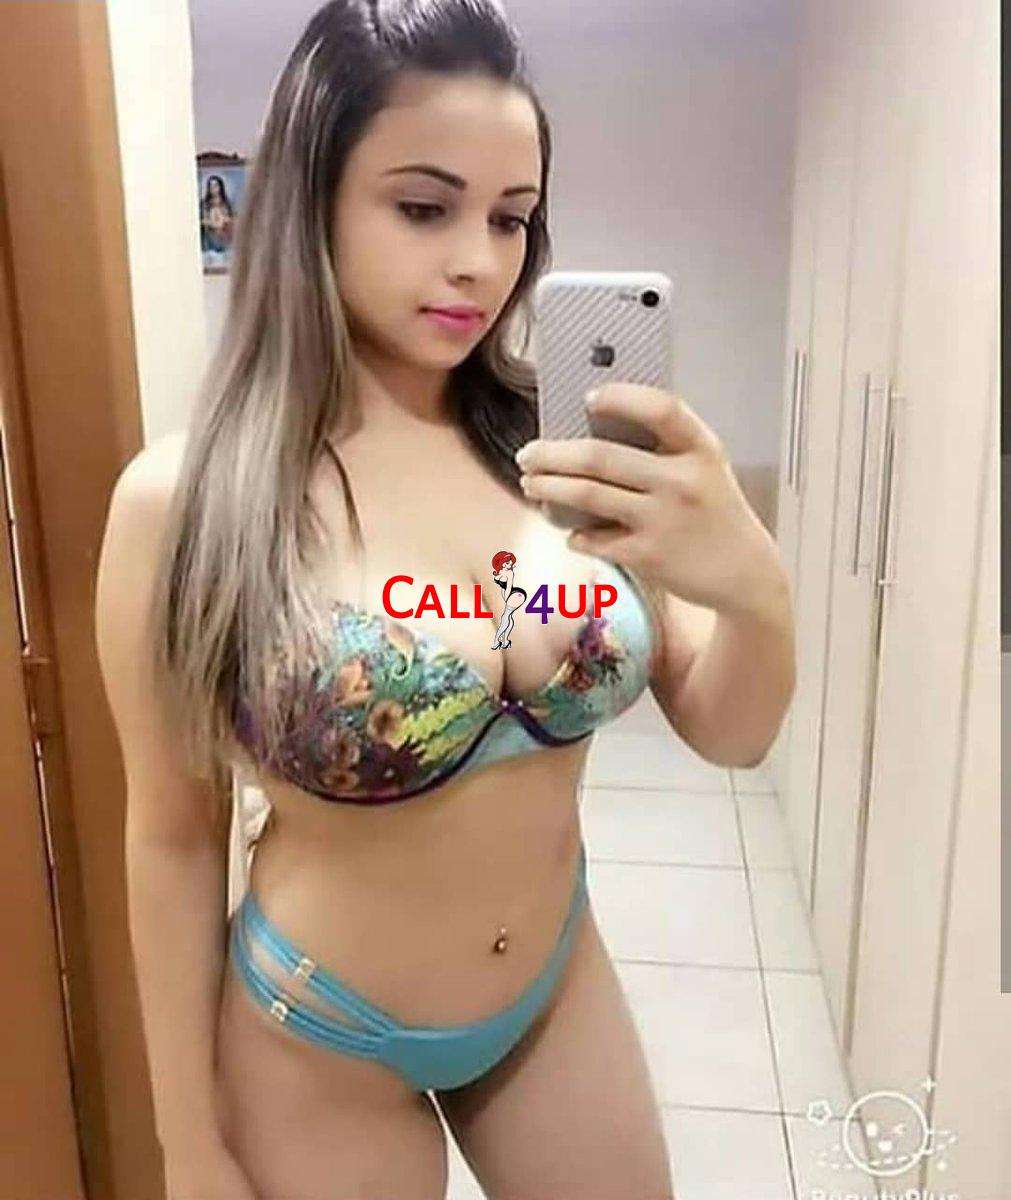 ❣️trusted ❣️ girl hand to hand ❣️cash payment❣️ call girl se